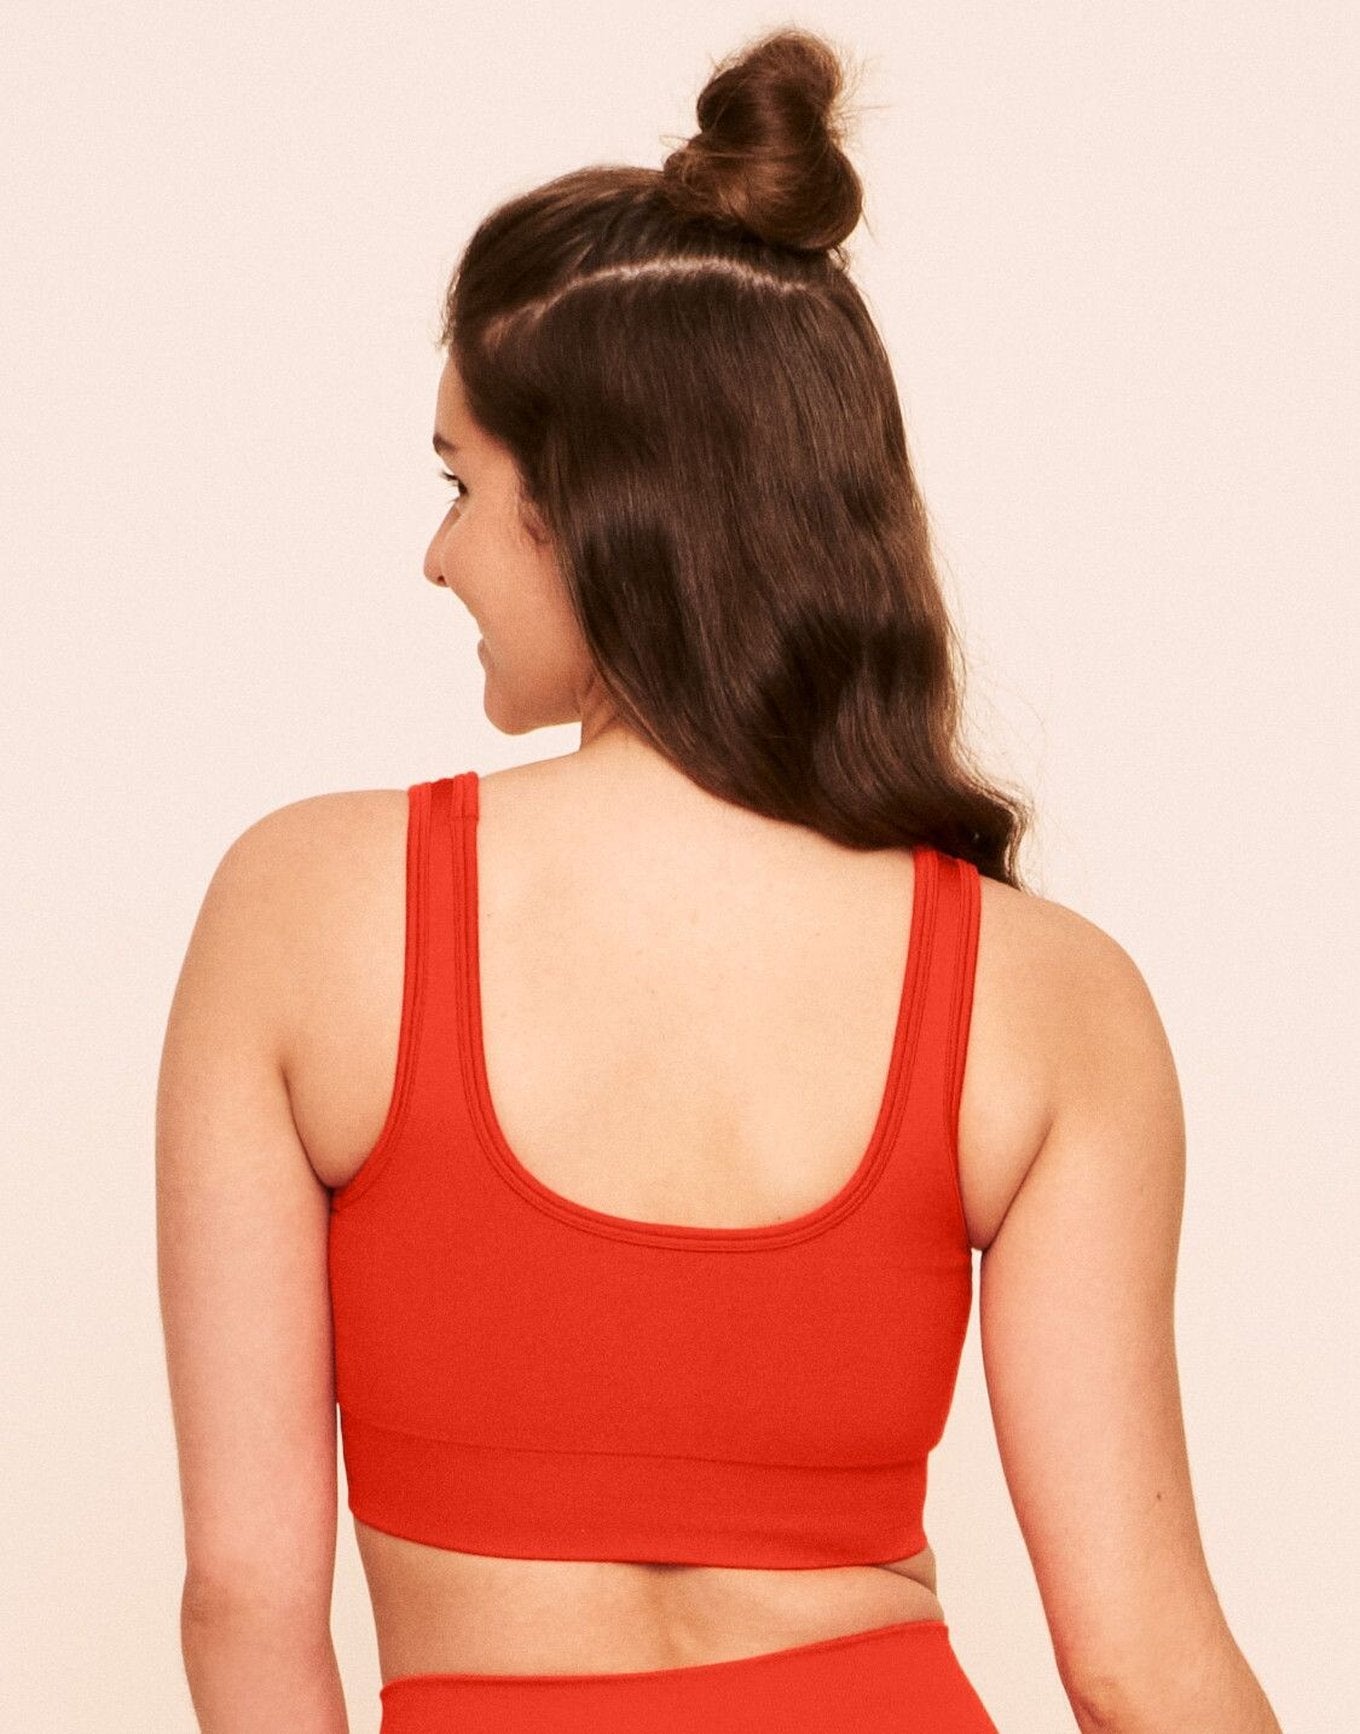 Earth Republic Maeve Ombre Sports Bra Sports Bra in color Solid 05 - Ombre Red and shape sports bra